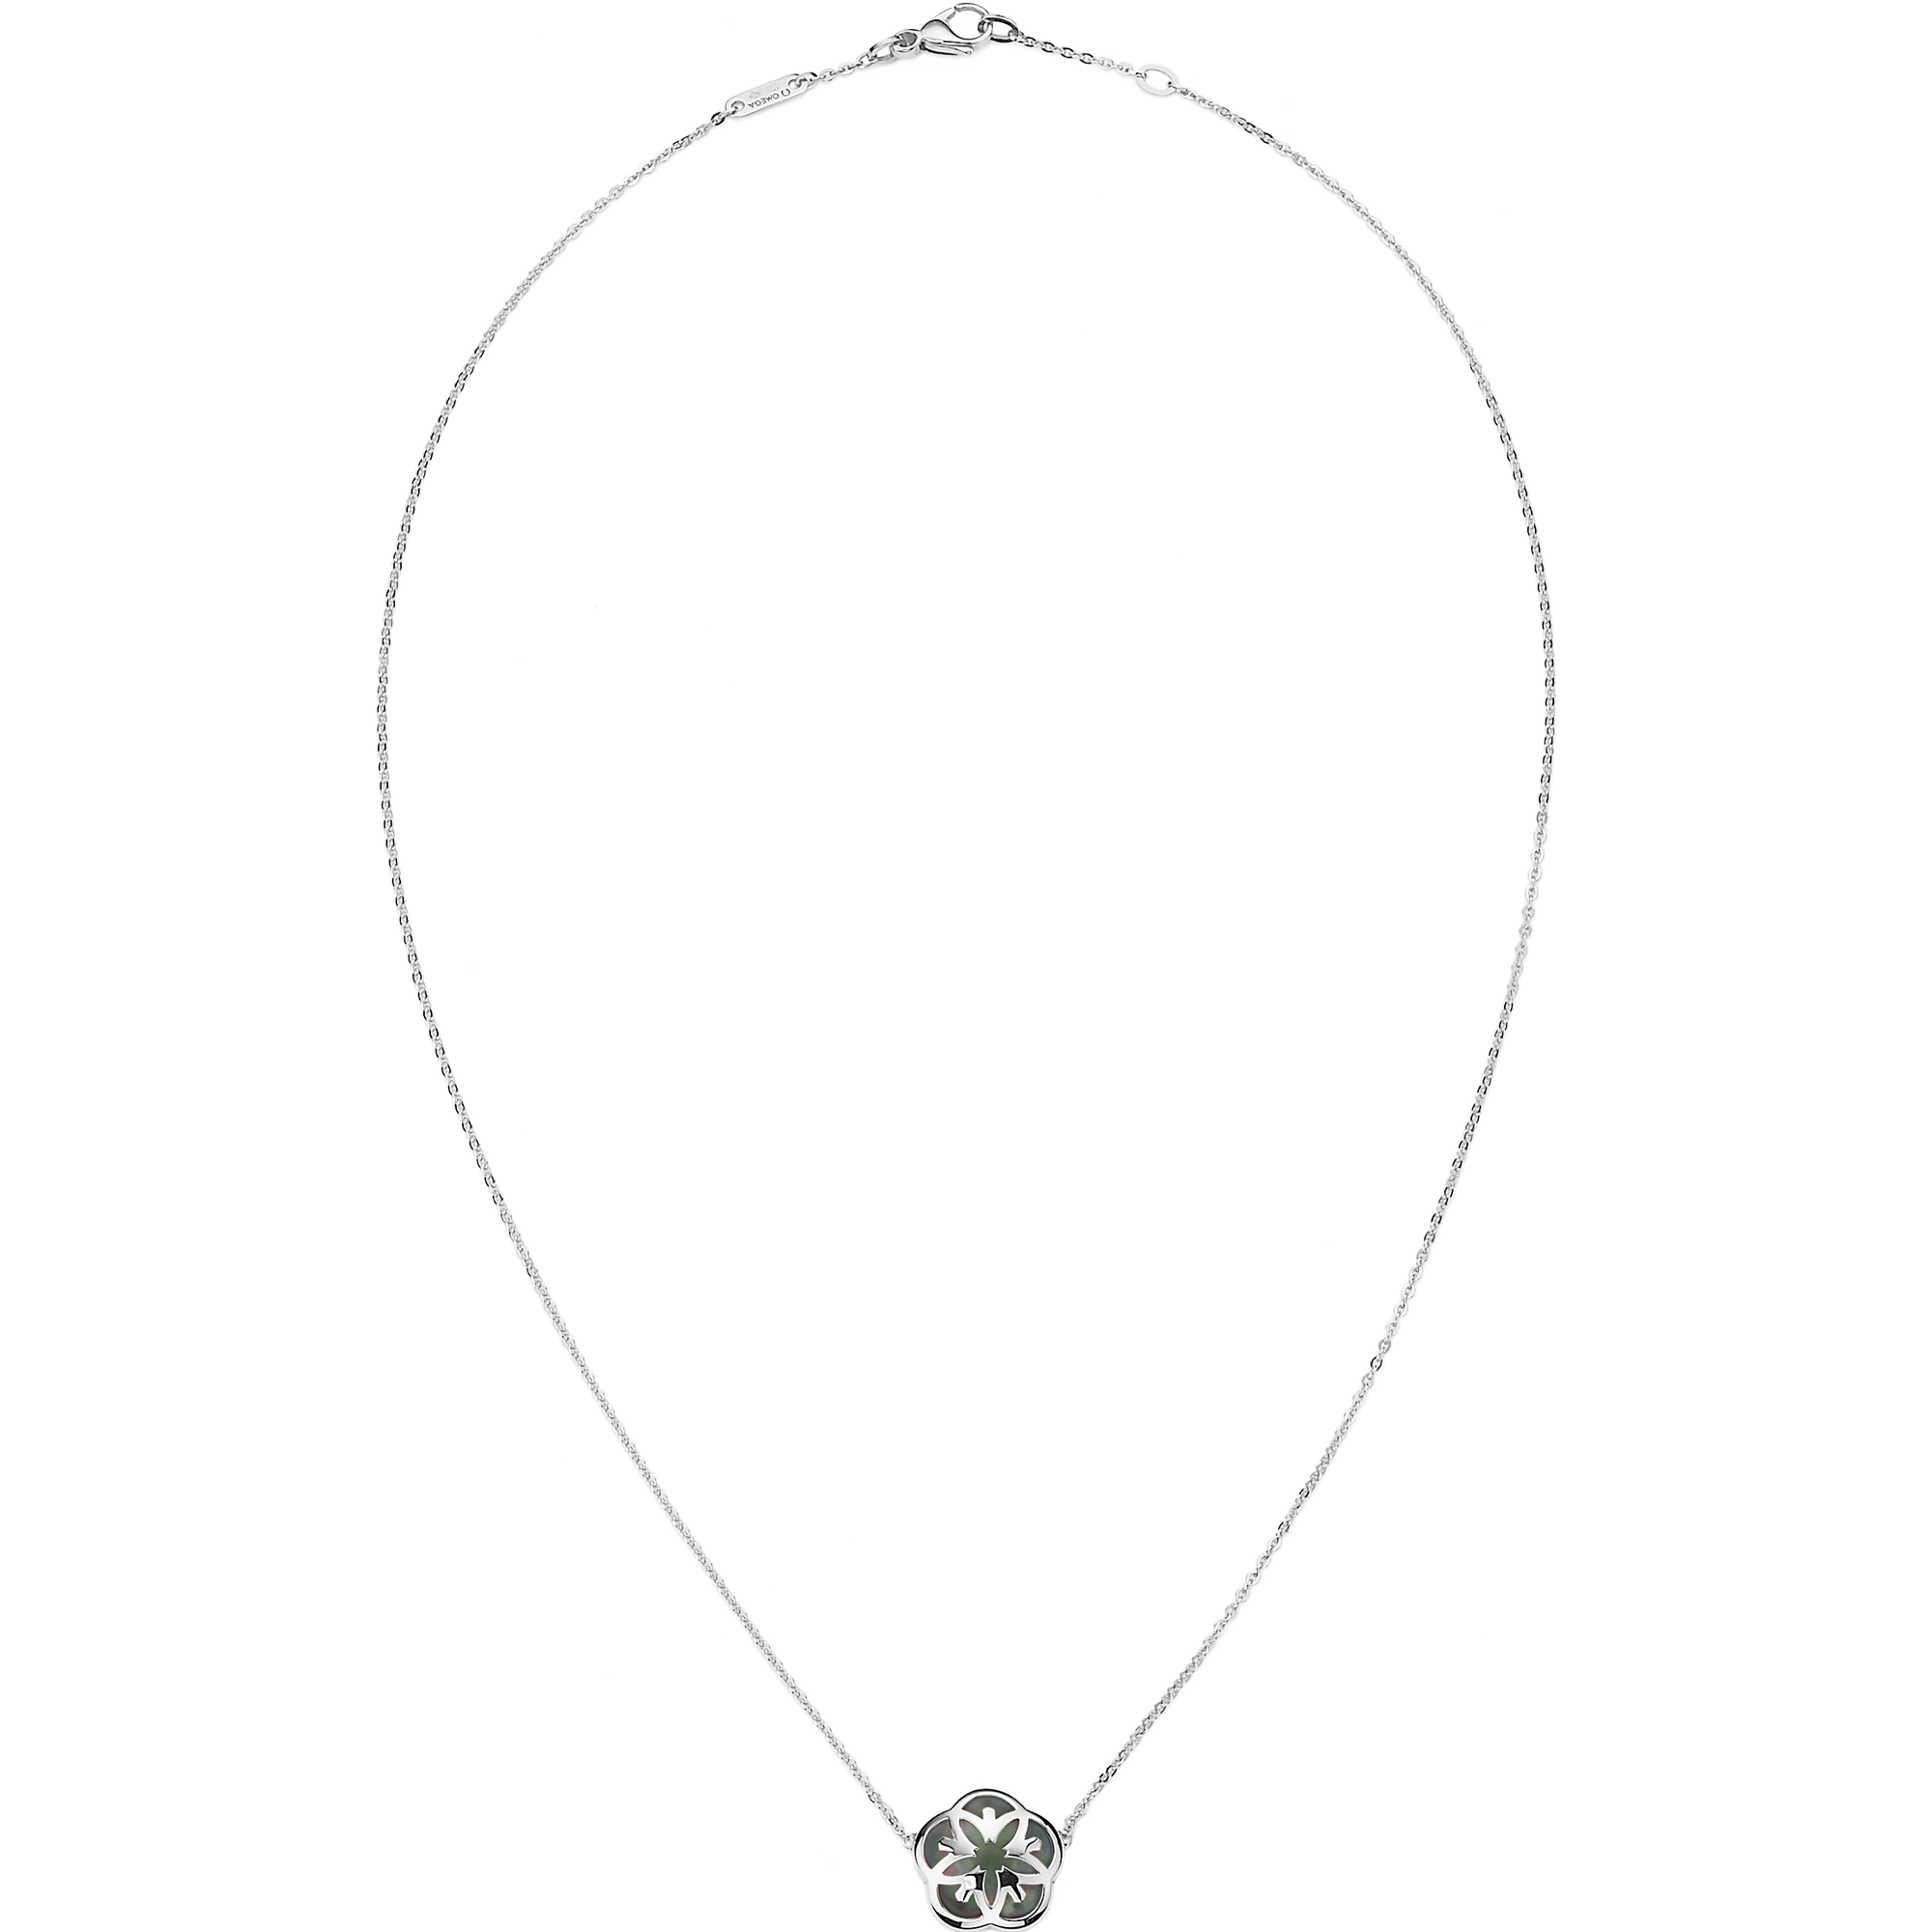 Omega Flower Necklace, 18K white gold, Tahiti Mother-of-Pearl - N603BC0700305